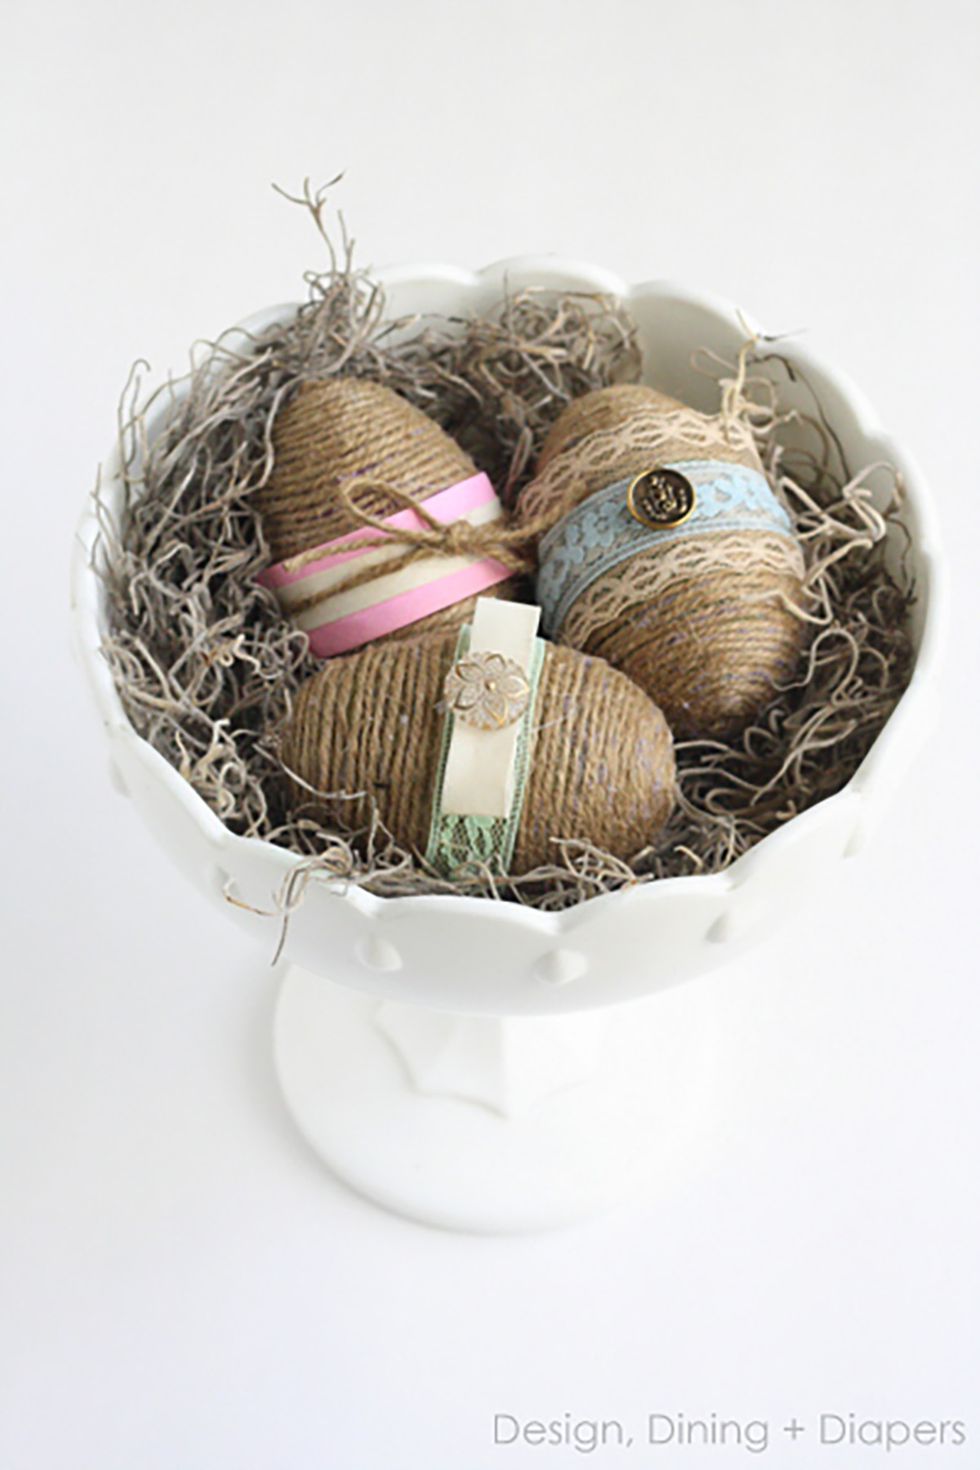 20 Awesome Last Minute DIY Easter Decor Ideas